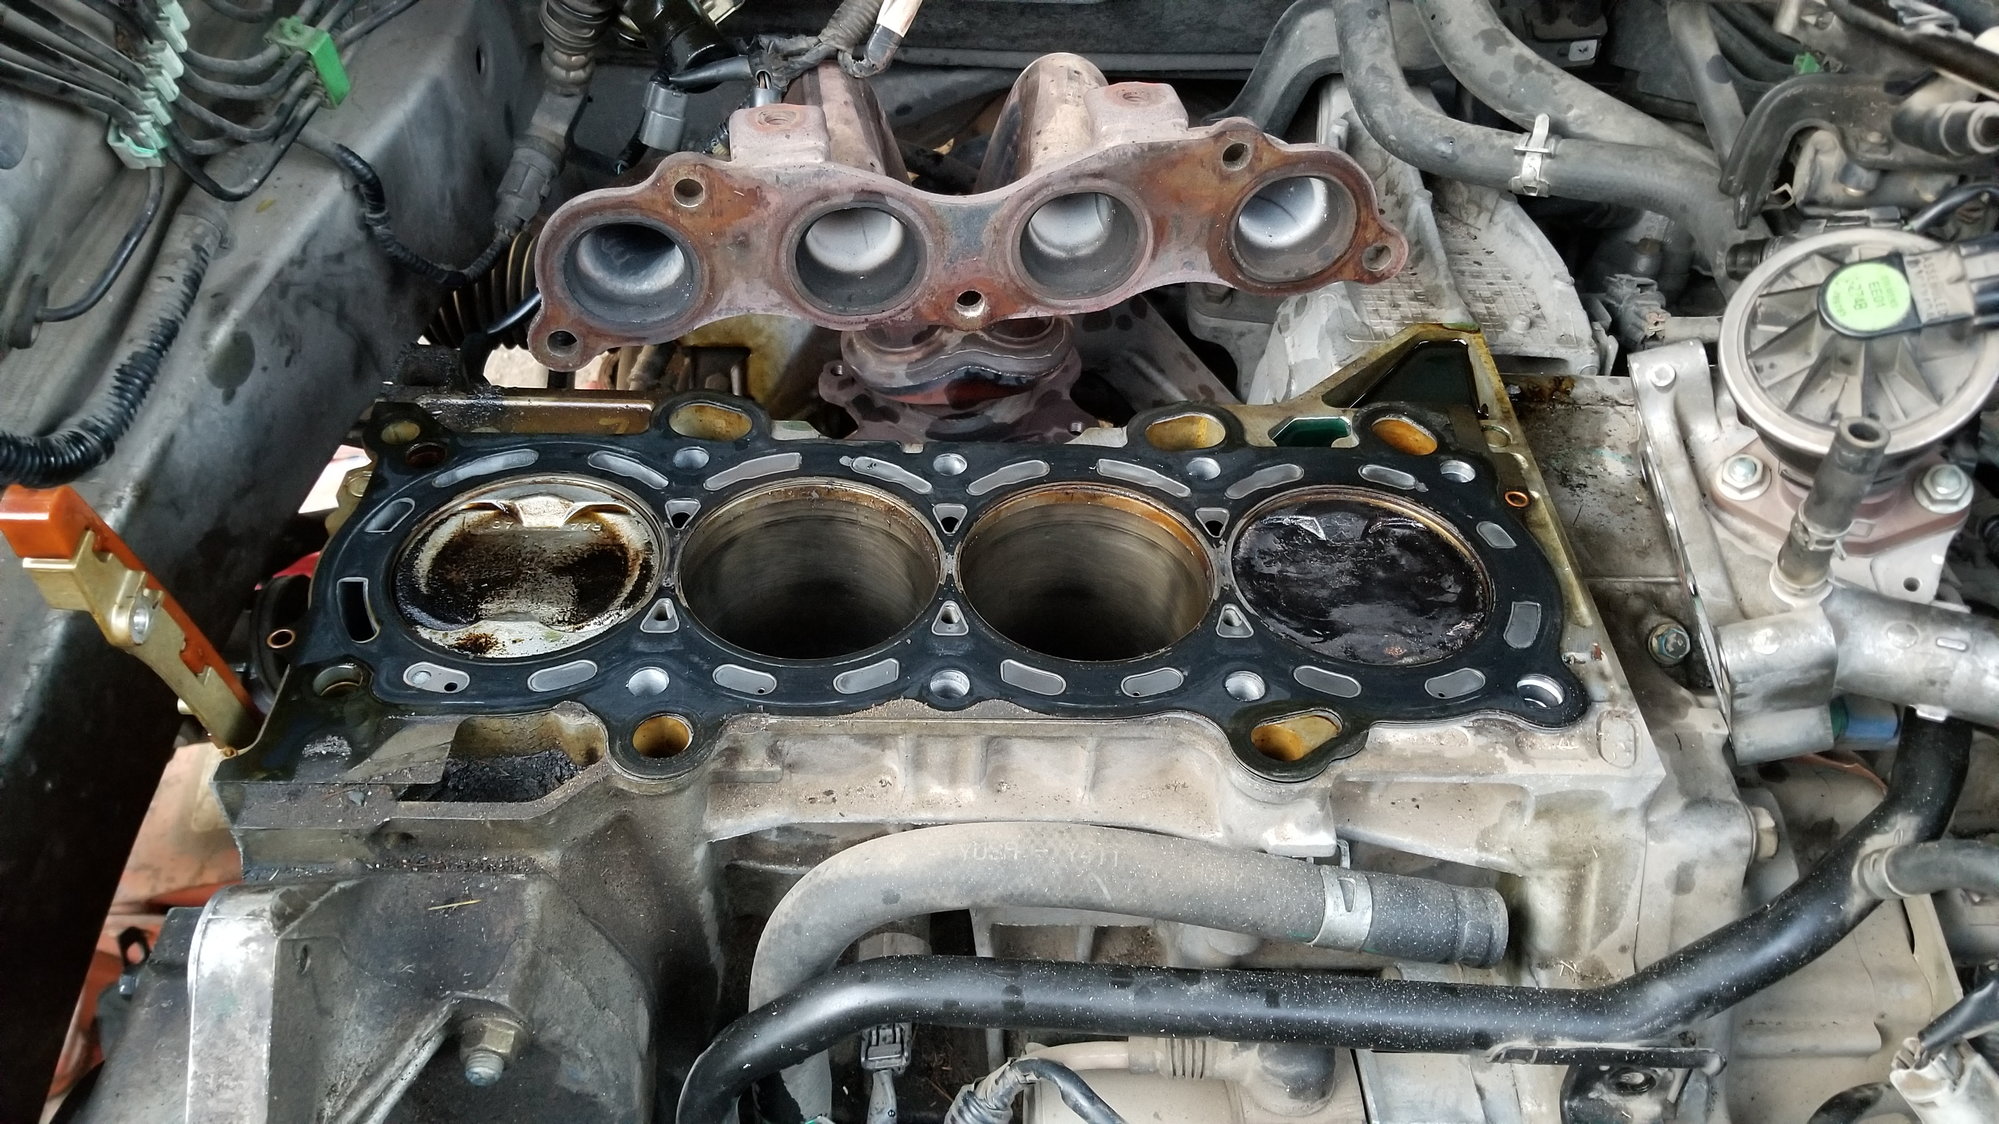 09 accord 3.5 engine misfire cold intermittent